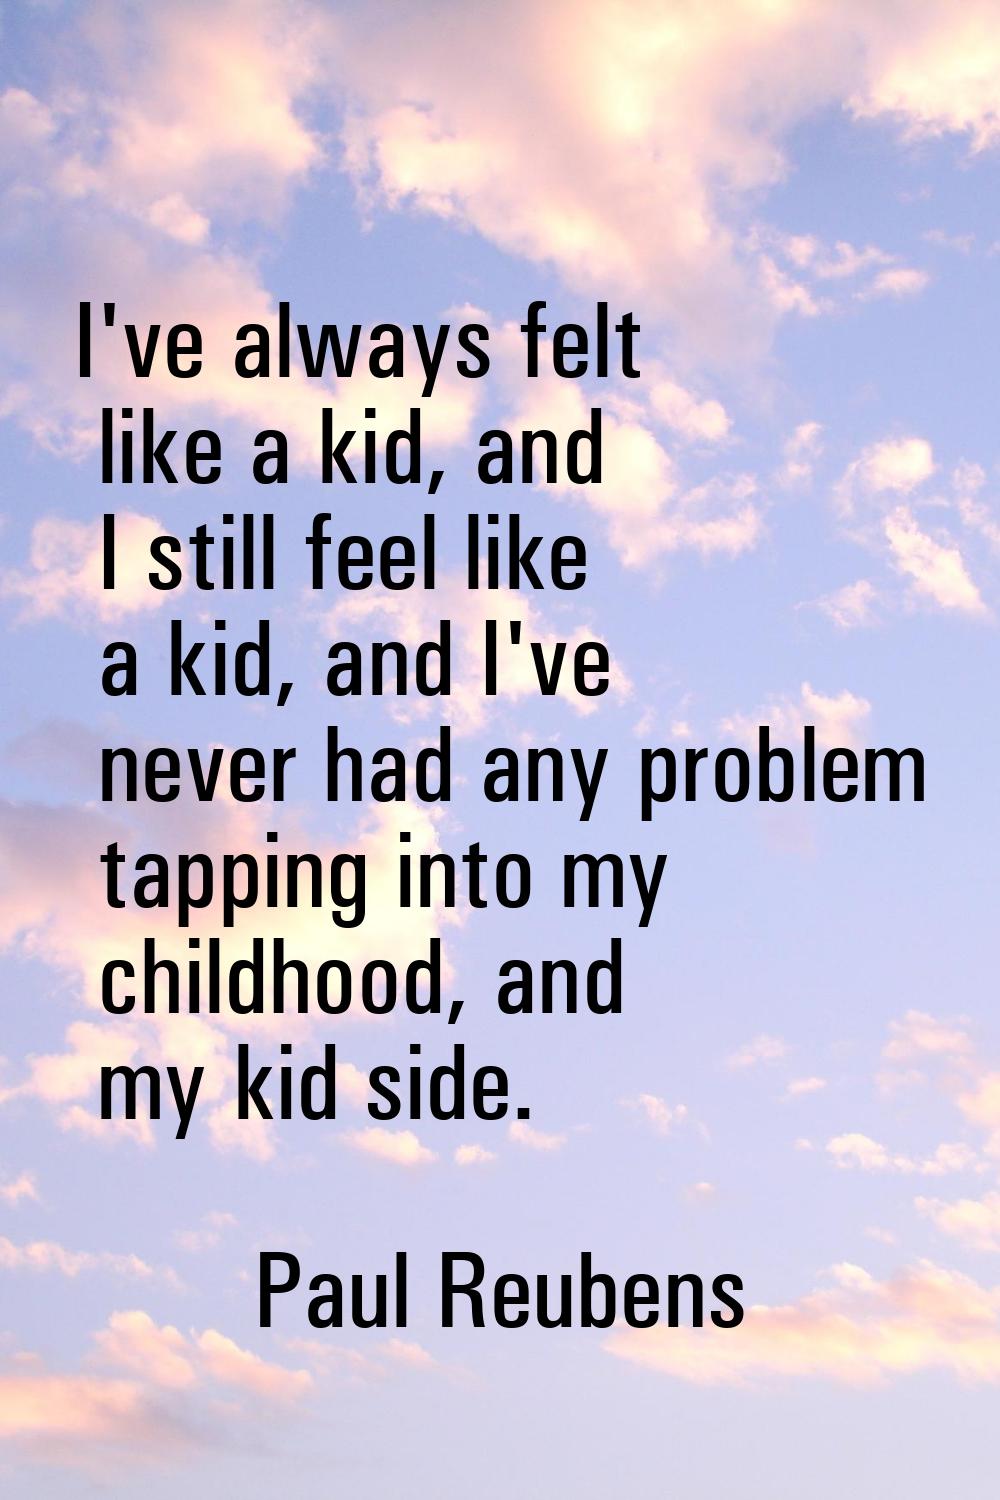 I've always felt like a kid, and I still feel like a kid, and I've never had any problem tapping in